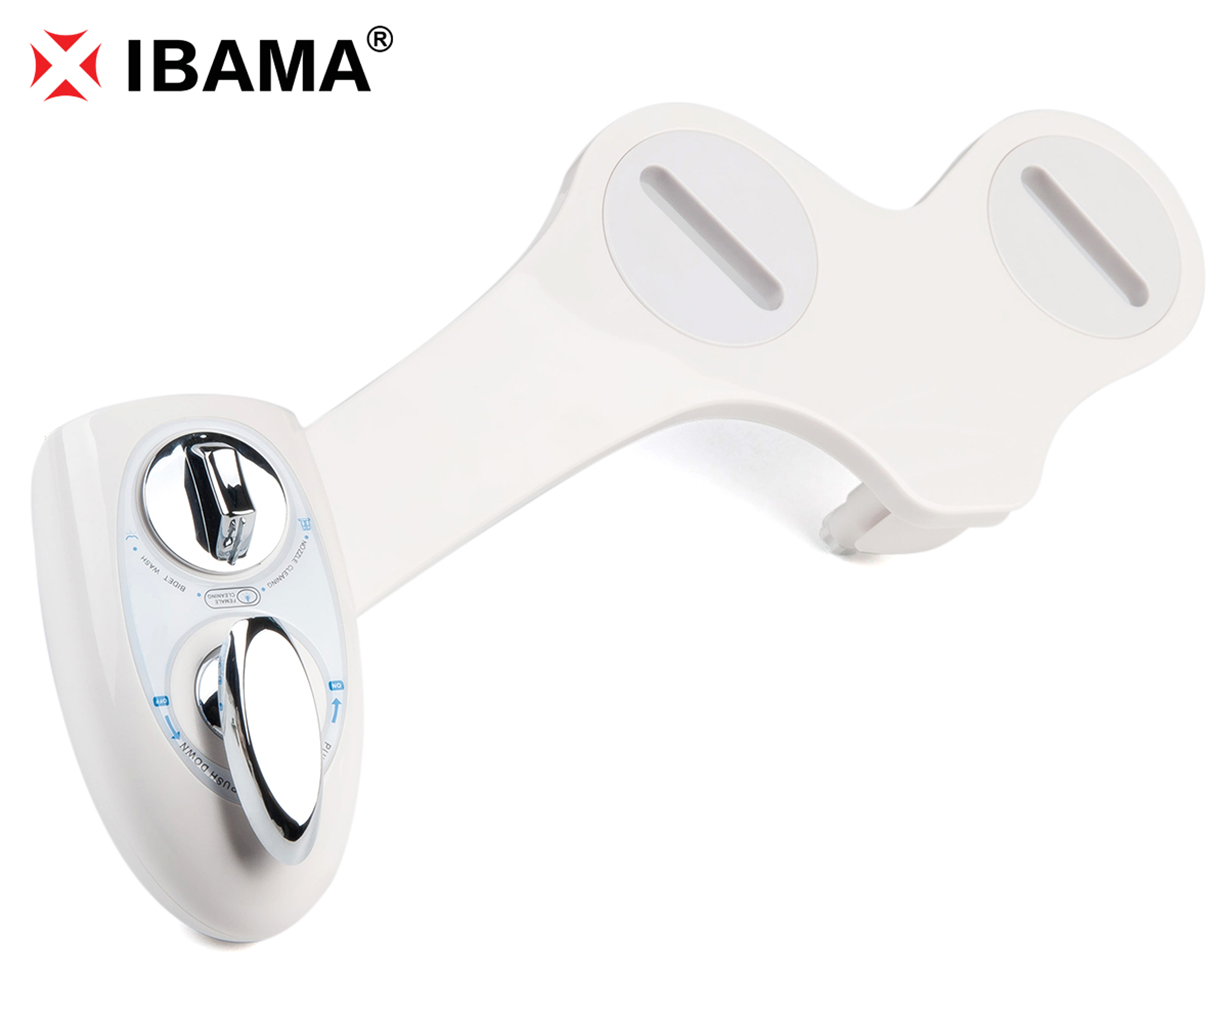 IBAMA NonElectric Mechanical Water Toilet Seat Attachable Bidet Dual Nozzle Male Female Adjustable Water Pressure